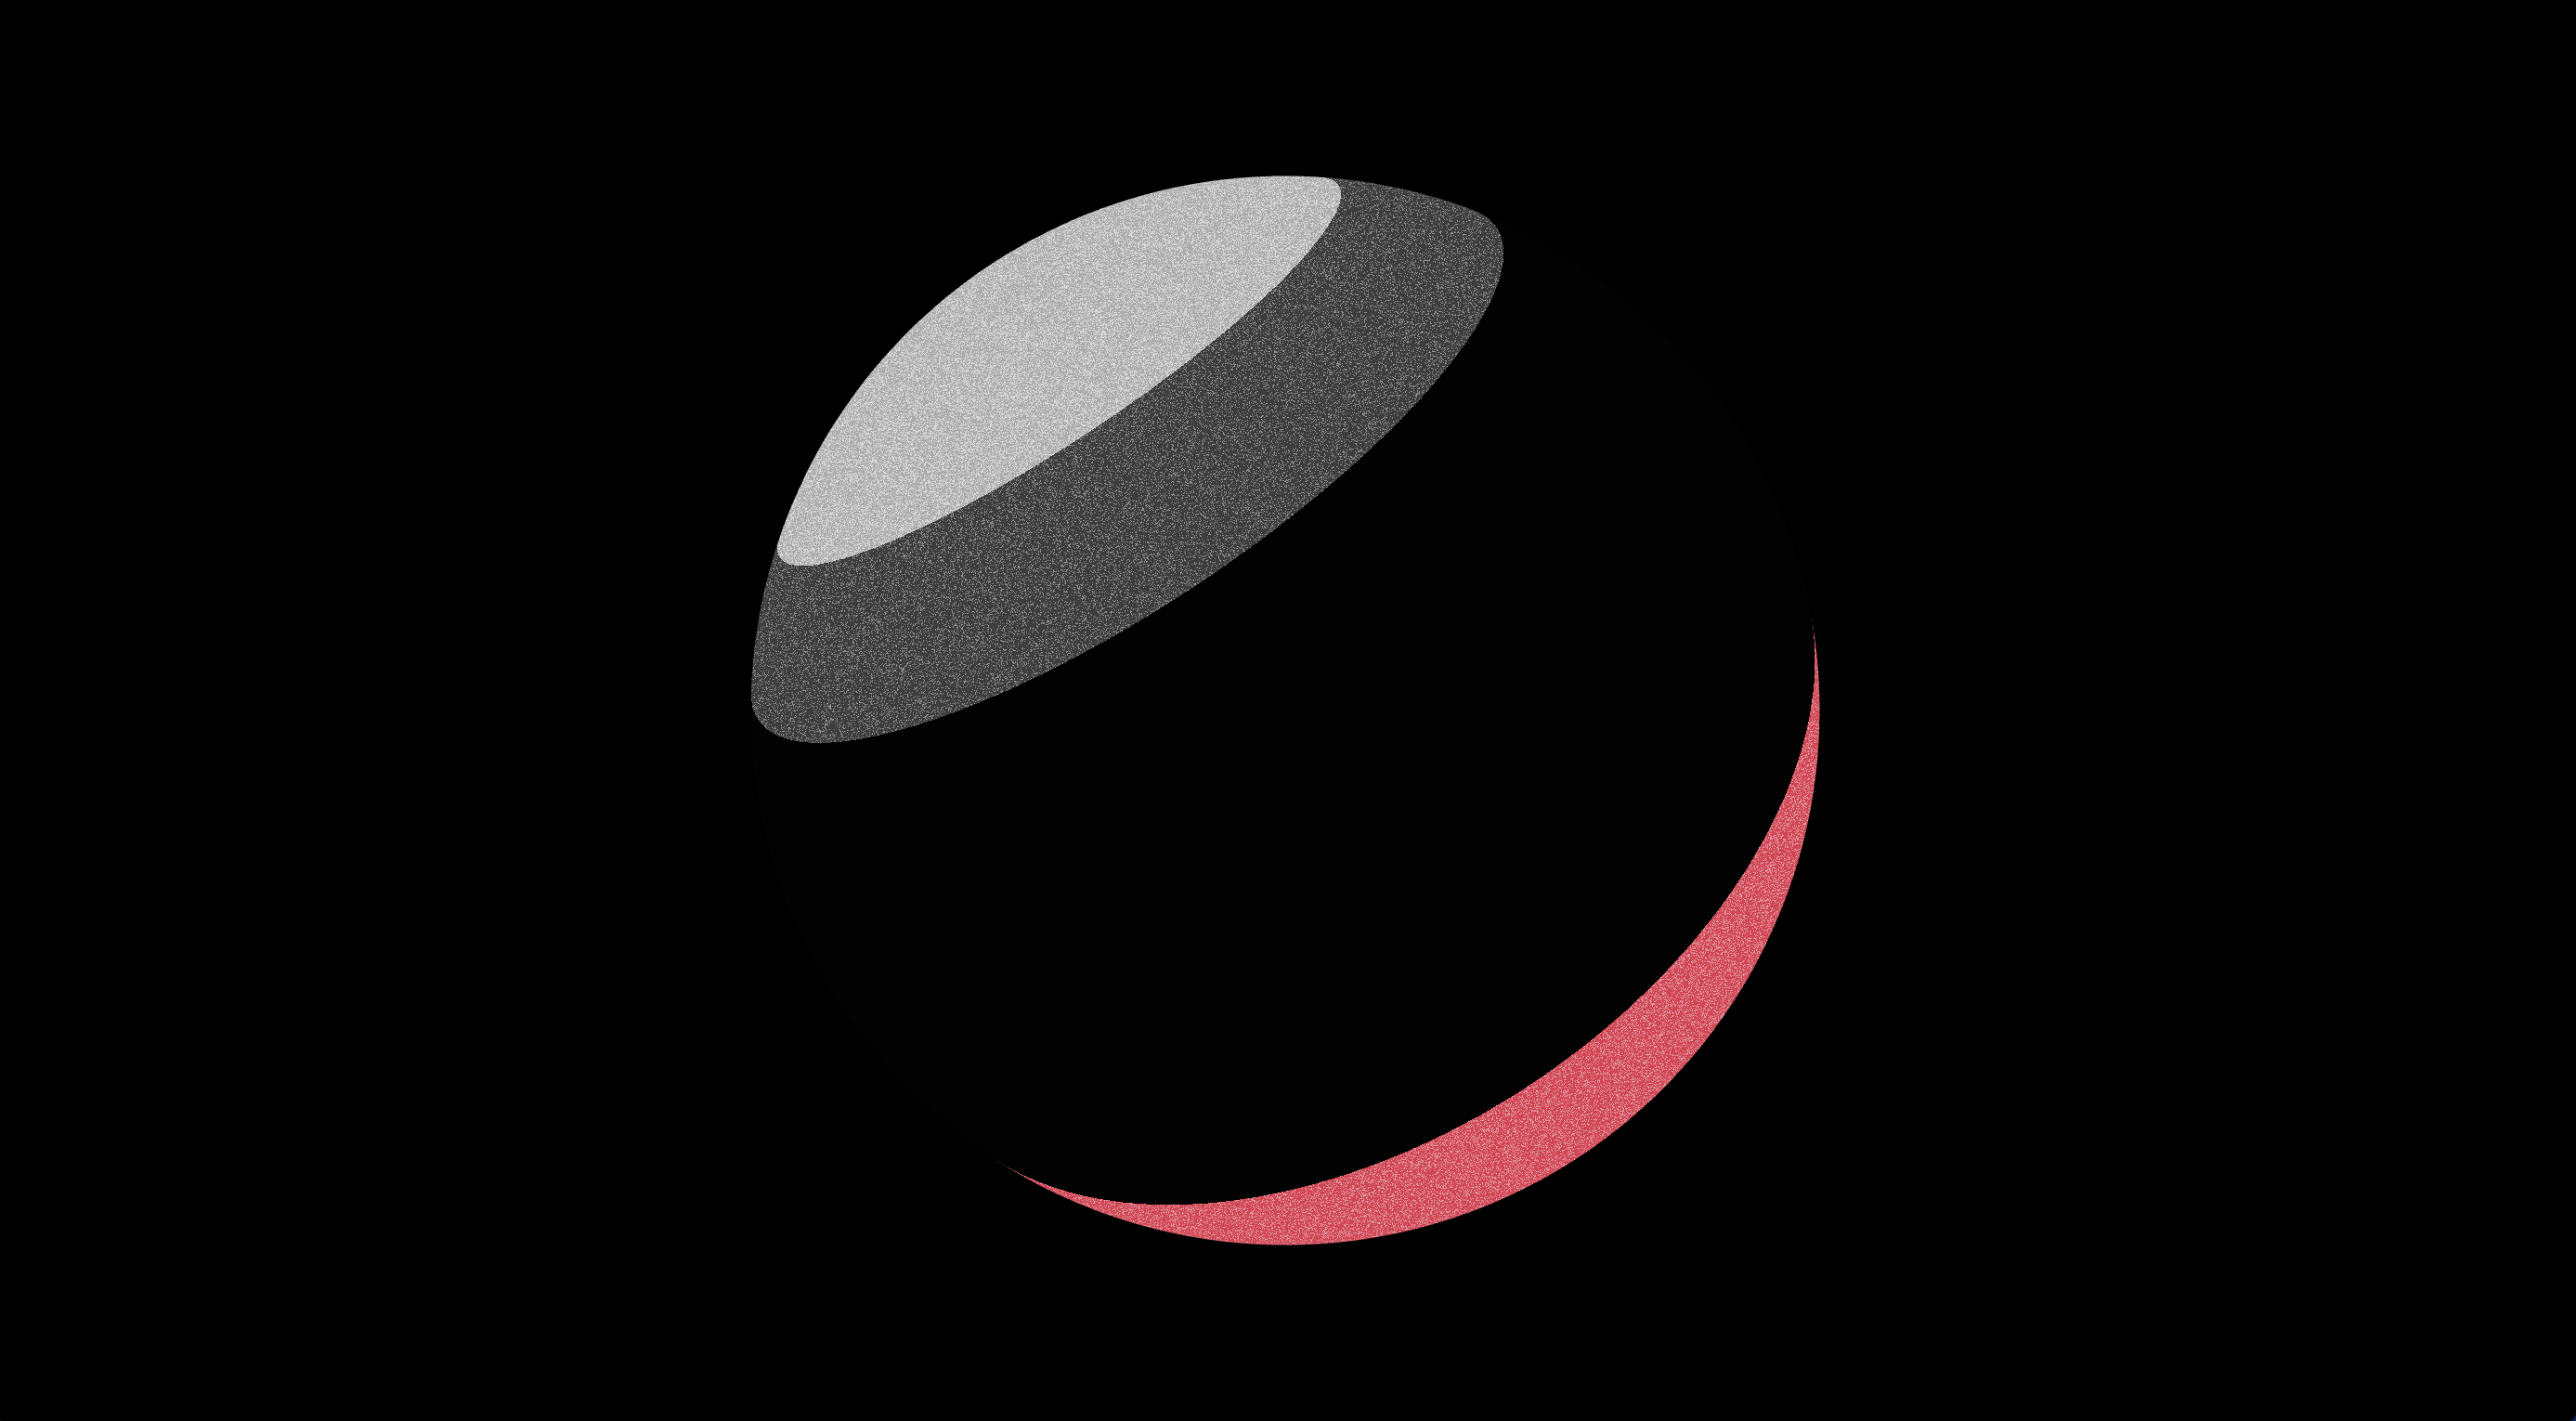 Sphere colored with noir shading